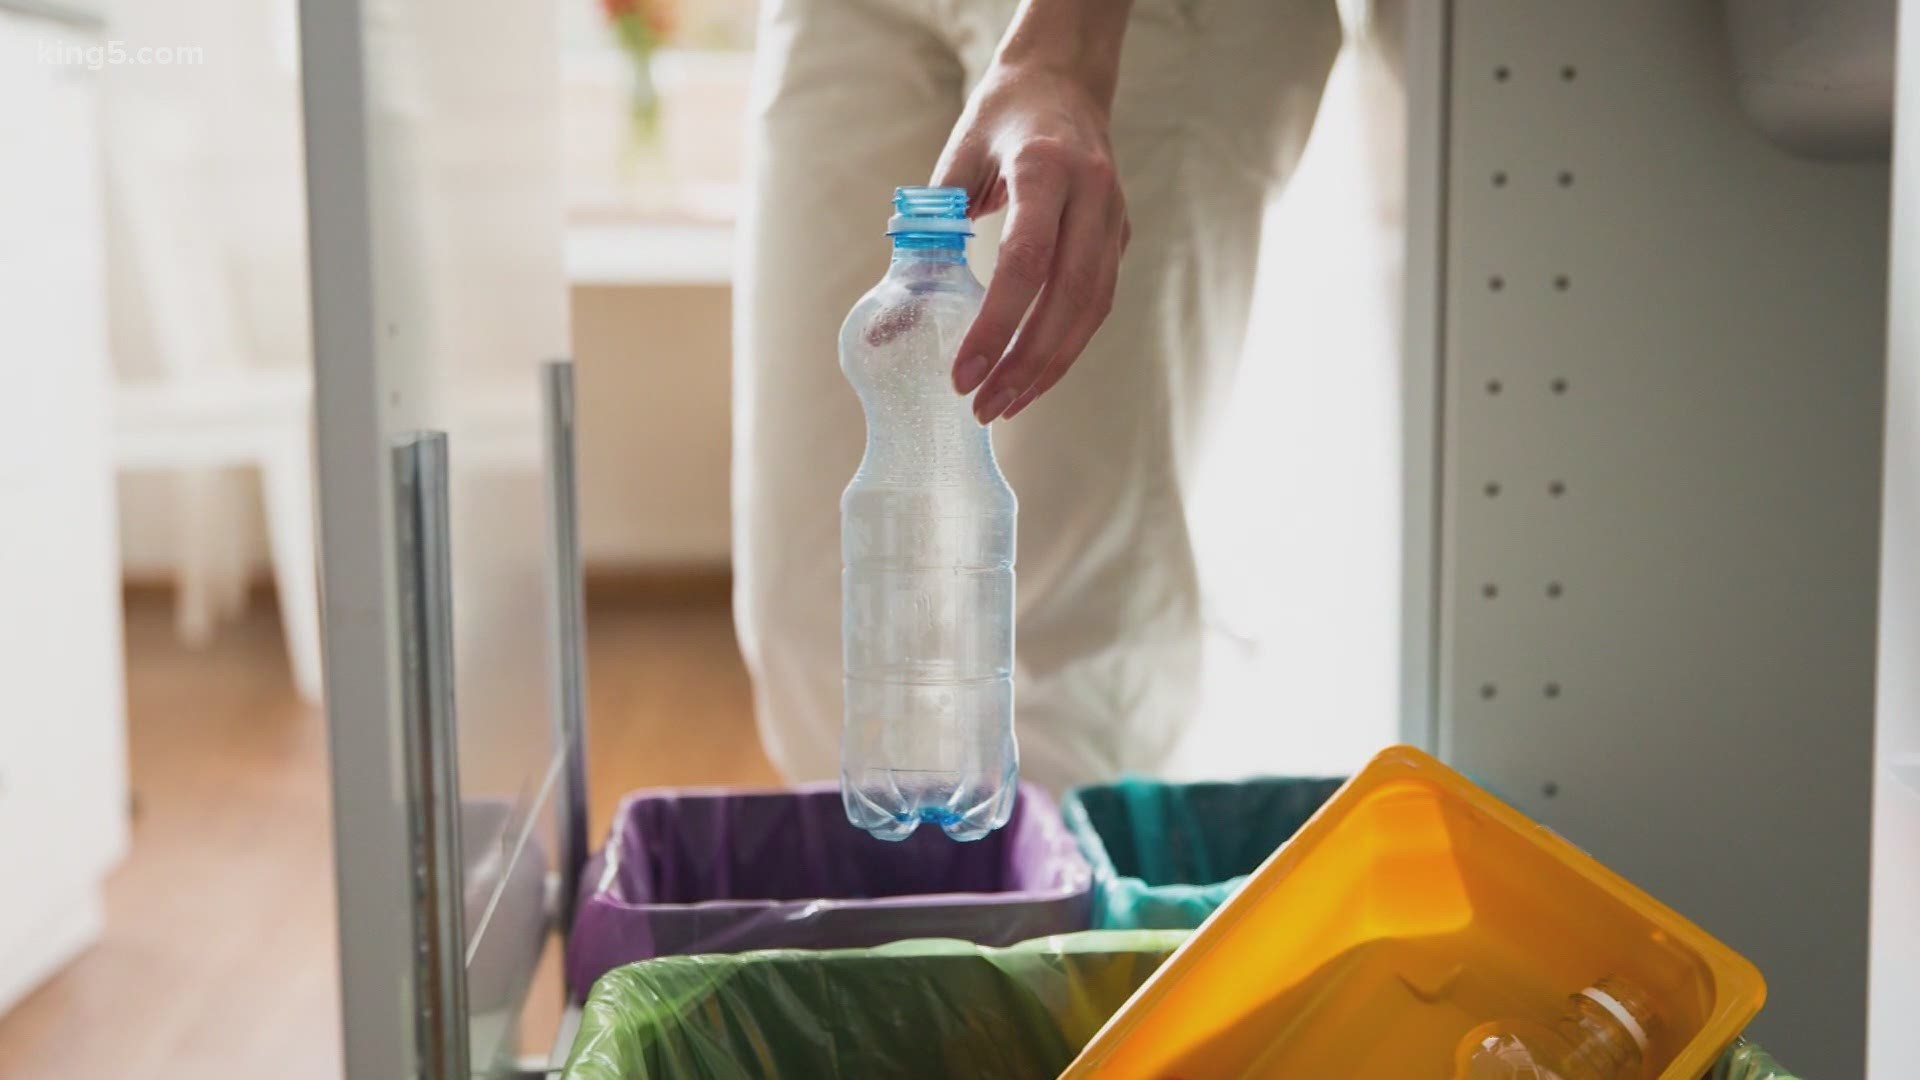 Yes, experts say it's crucial to wash your recyclables before putting them in the bin.